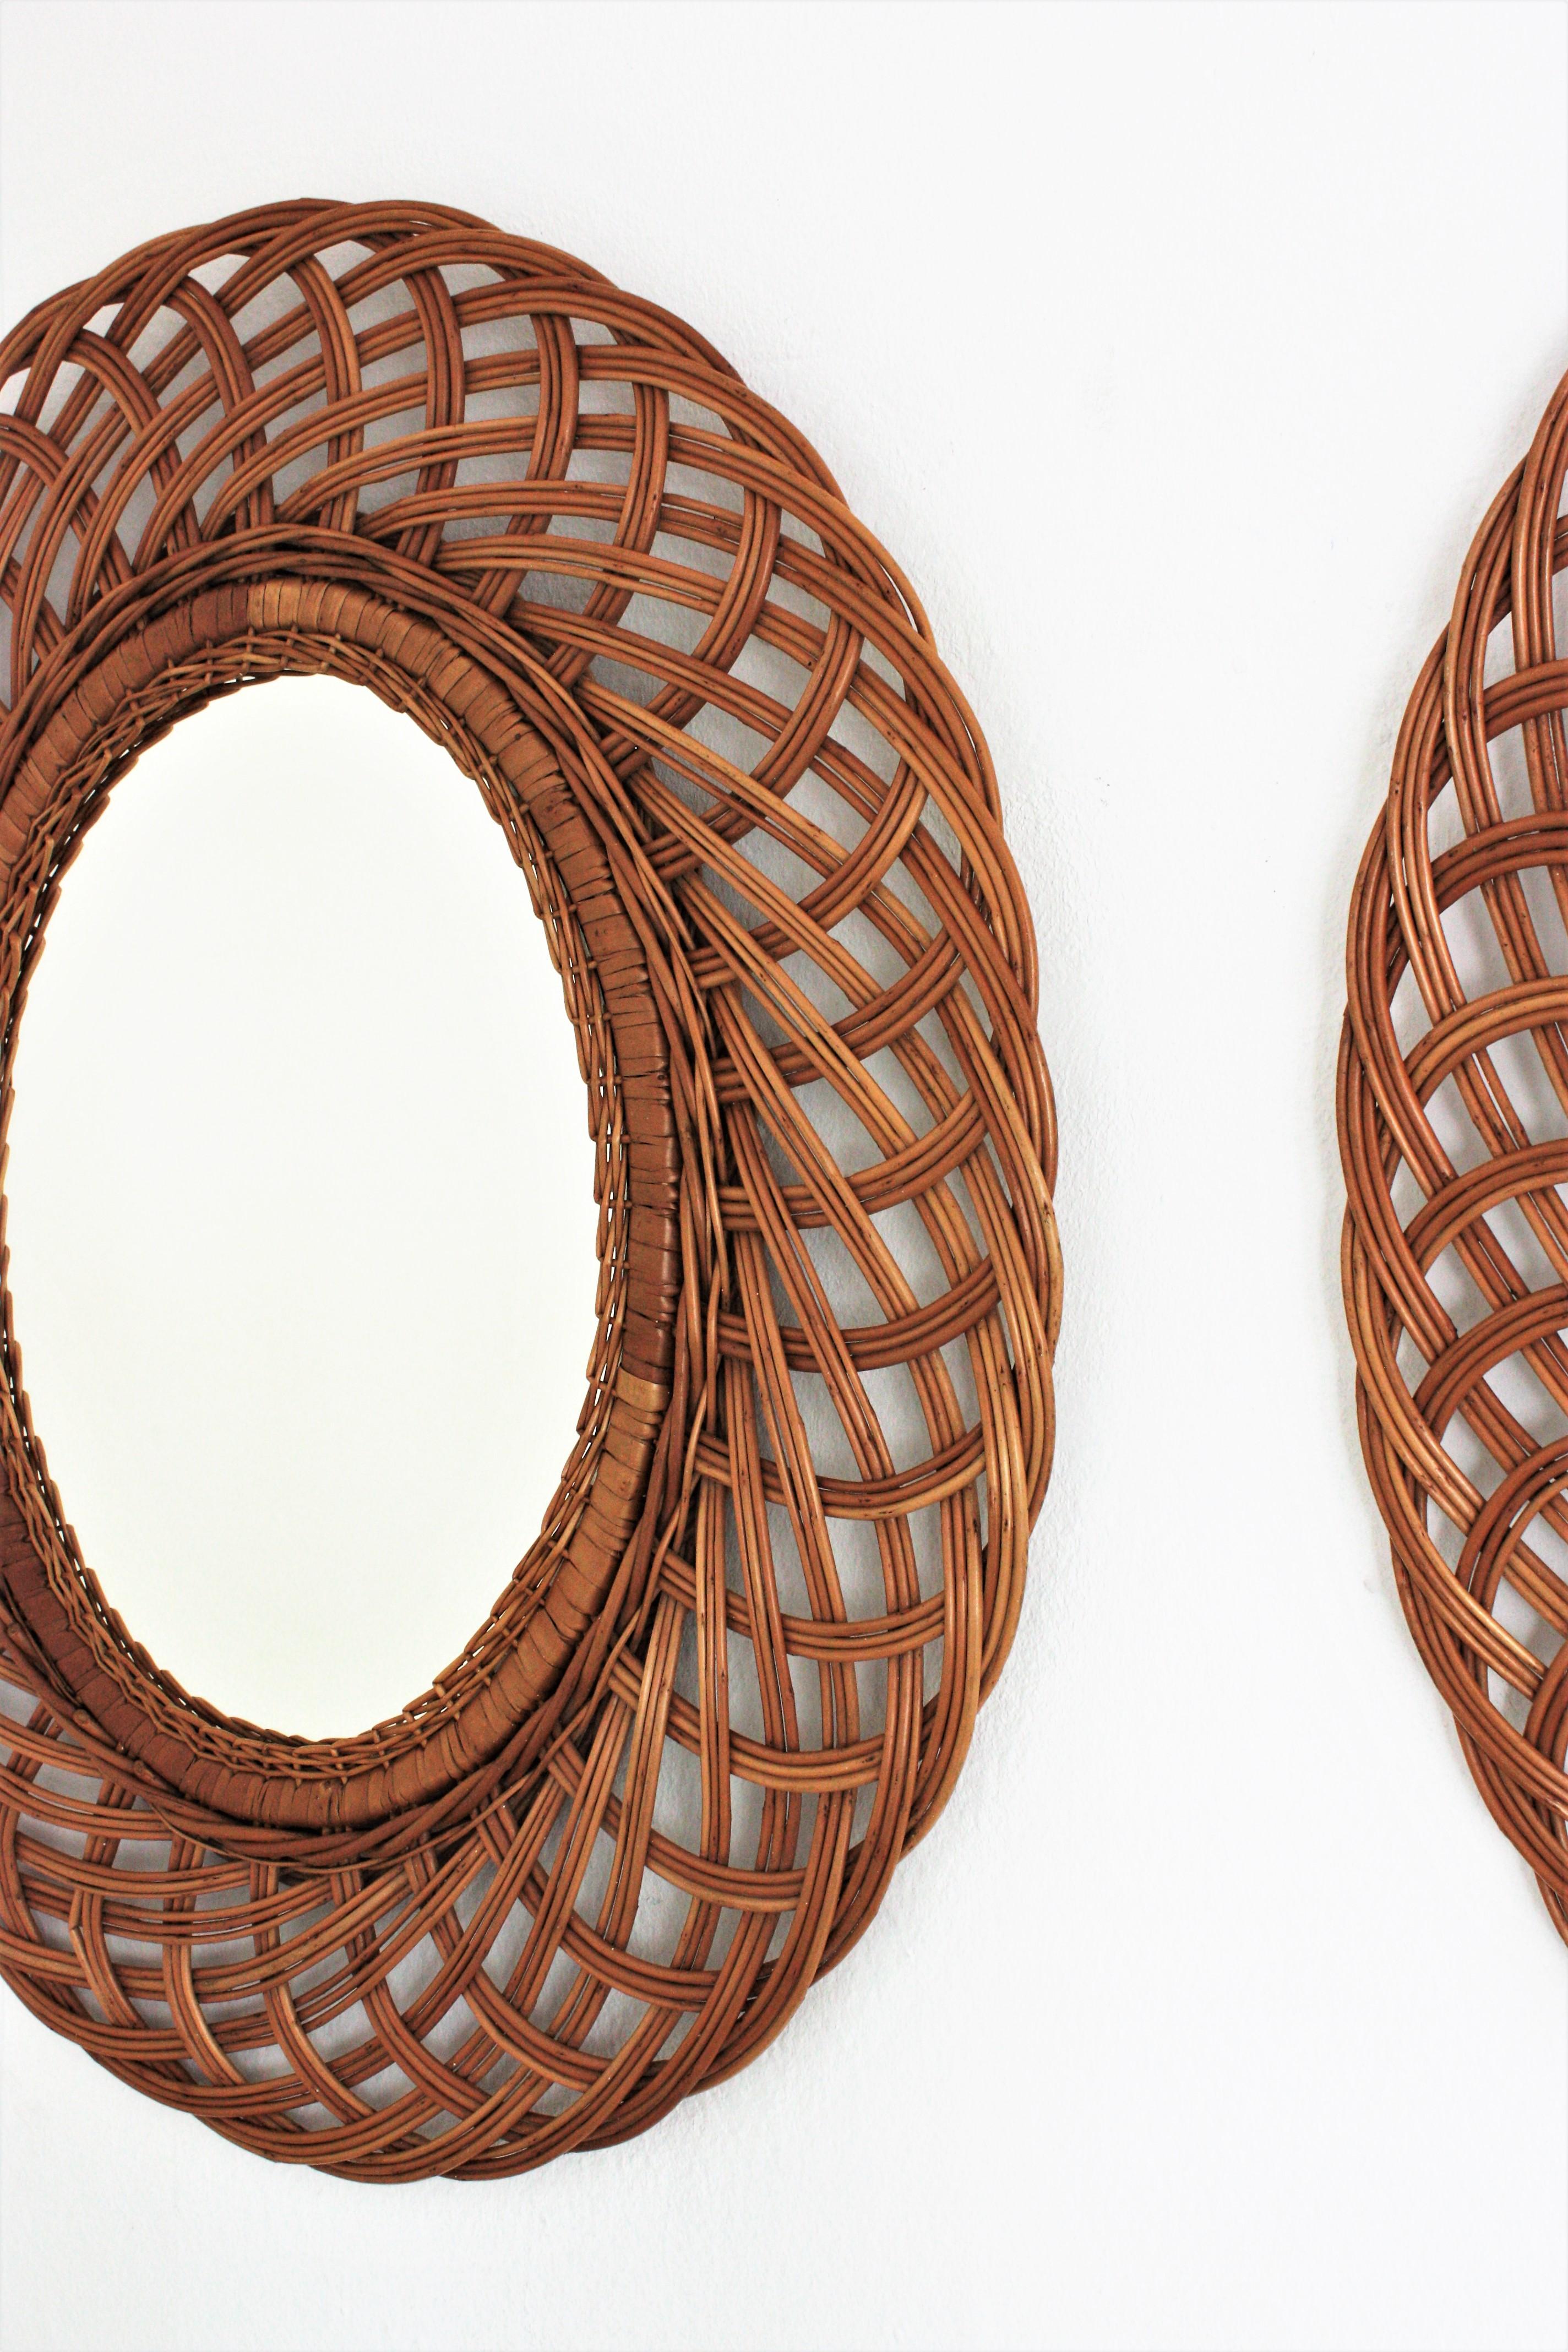 Pair of Rattan and Wicker Oval Mirrors, Spain, 1960s 3